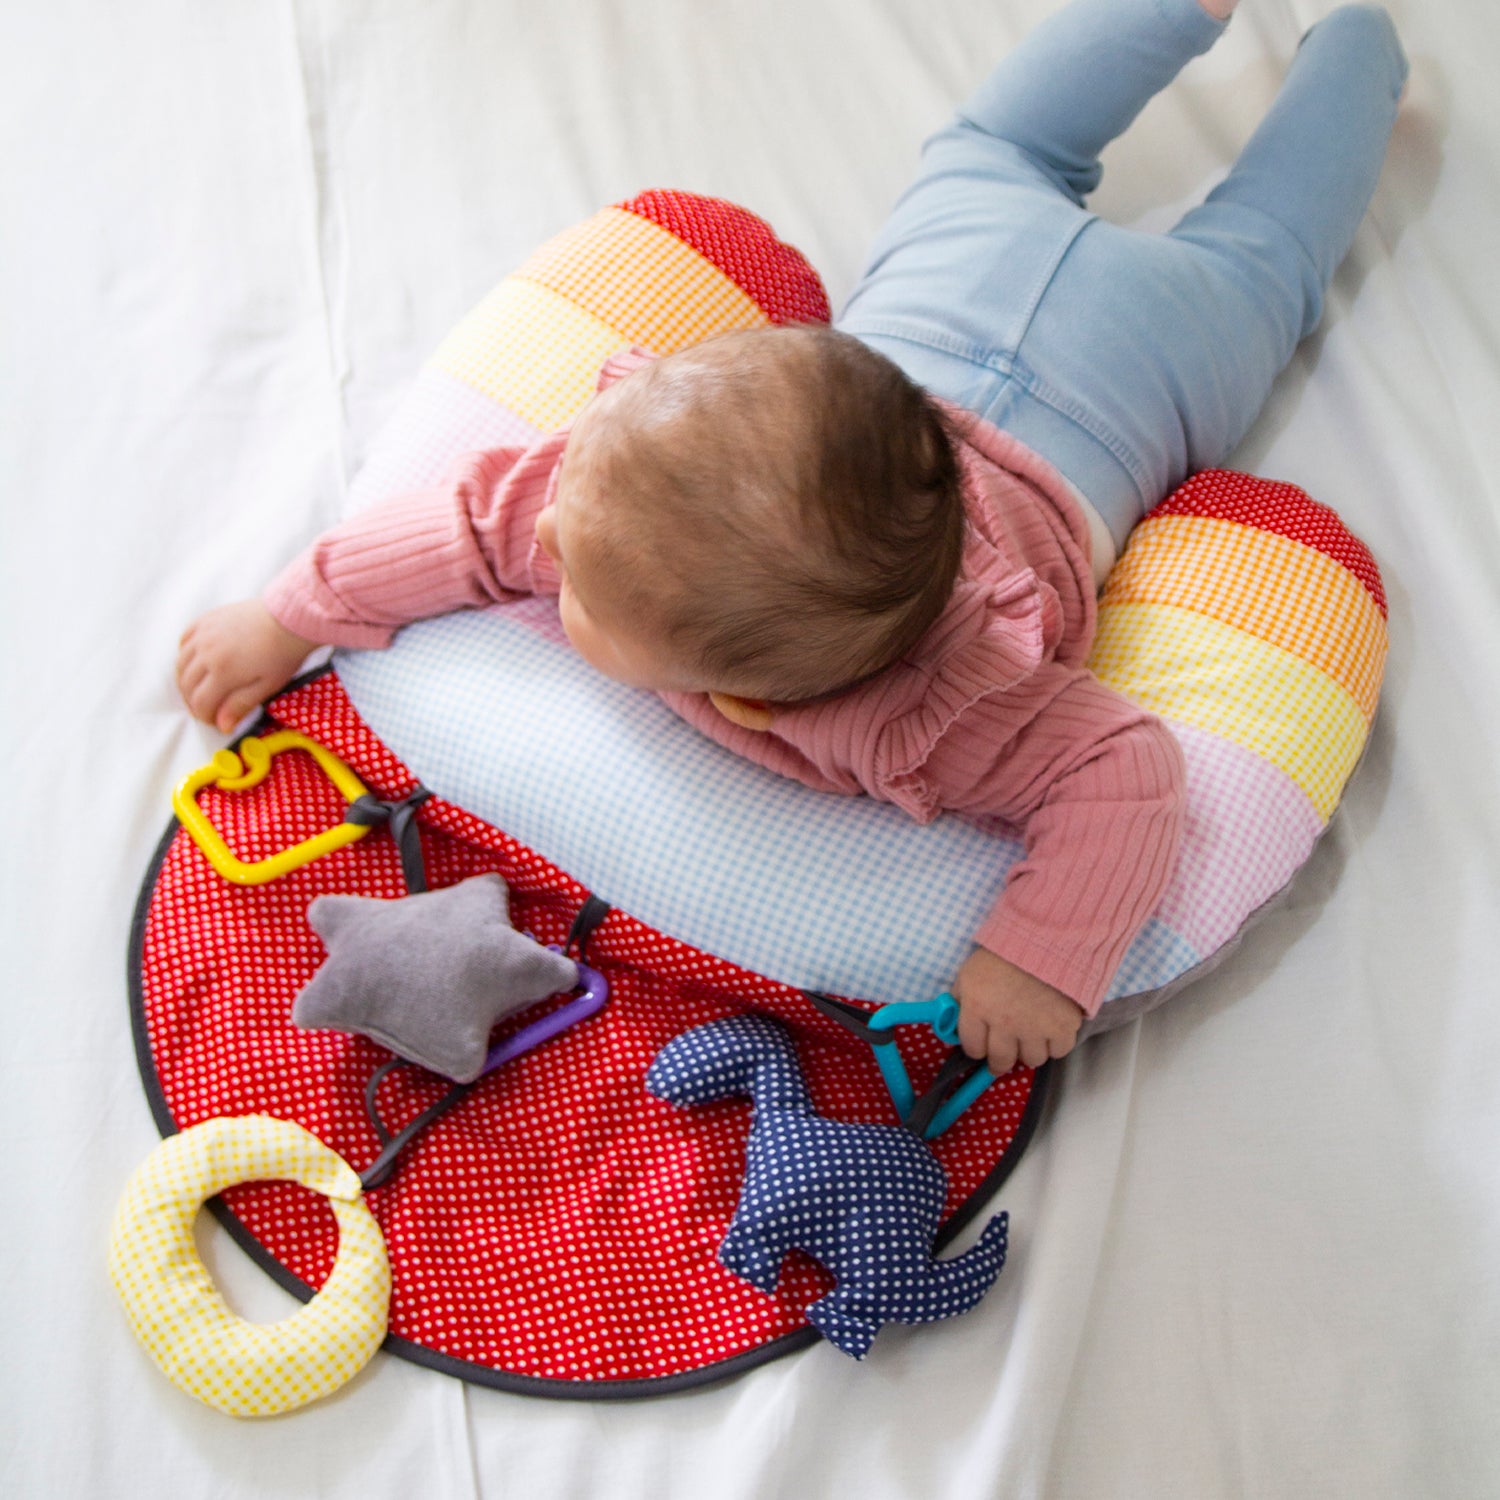 Exercise Pillow with Toys-Boy, catbabygear, catedu, cattoy18m+, catveh, Colors, Exercise, Girl, Lay, Laying, Newborn, Pillow, Play, Safe, Sensory, Shapes, Sleeping, Soft, Toys, Tummy, Unisex-Babyjem-[Too Twee]-[Tootwee]-[baby]-[newborn]-[clothes]-[essentials]-[toys]-[Lebanon]